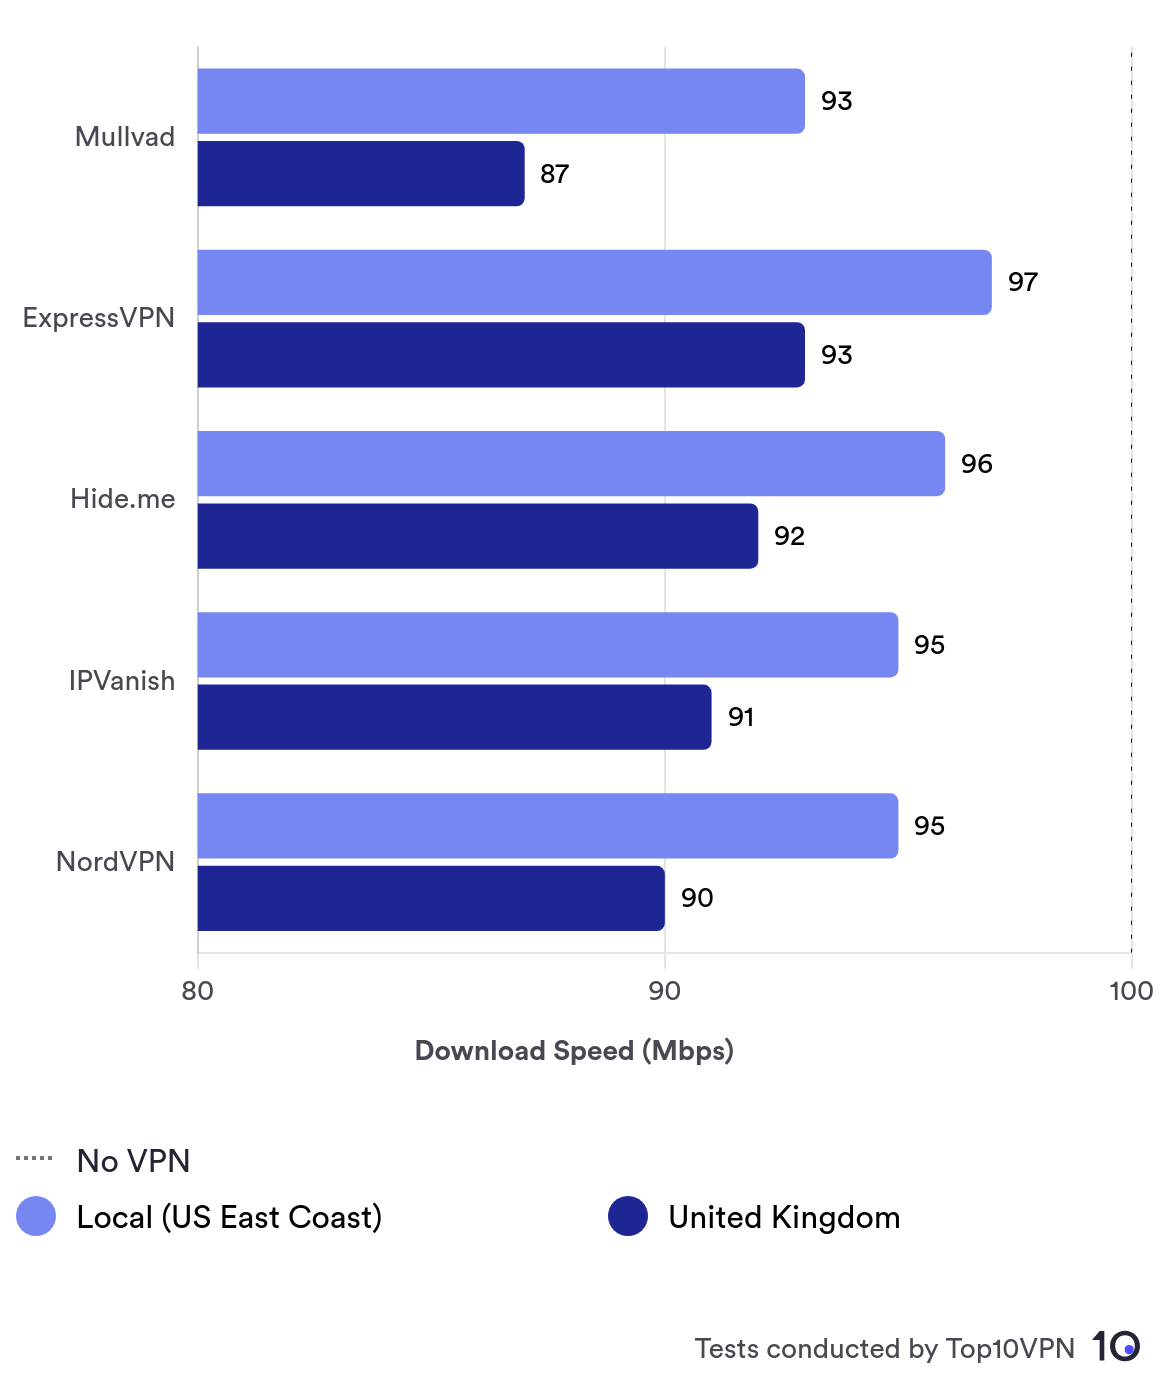 Mullvad's speeds when connecting to VPN servers in the same country and then the United Kingdom, then compared to ExpressVPN, Hide.me, IPVanish, and NordVPN. It does not fare very well in comparison. 